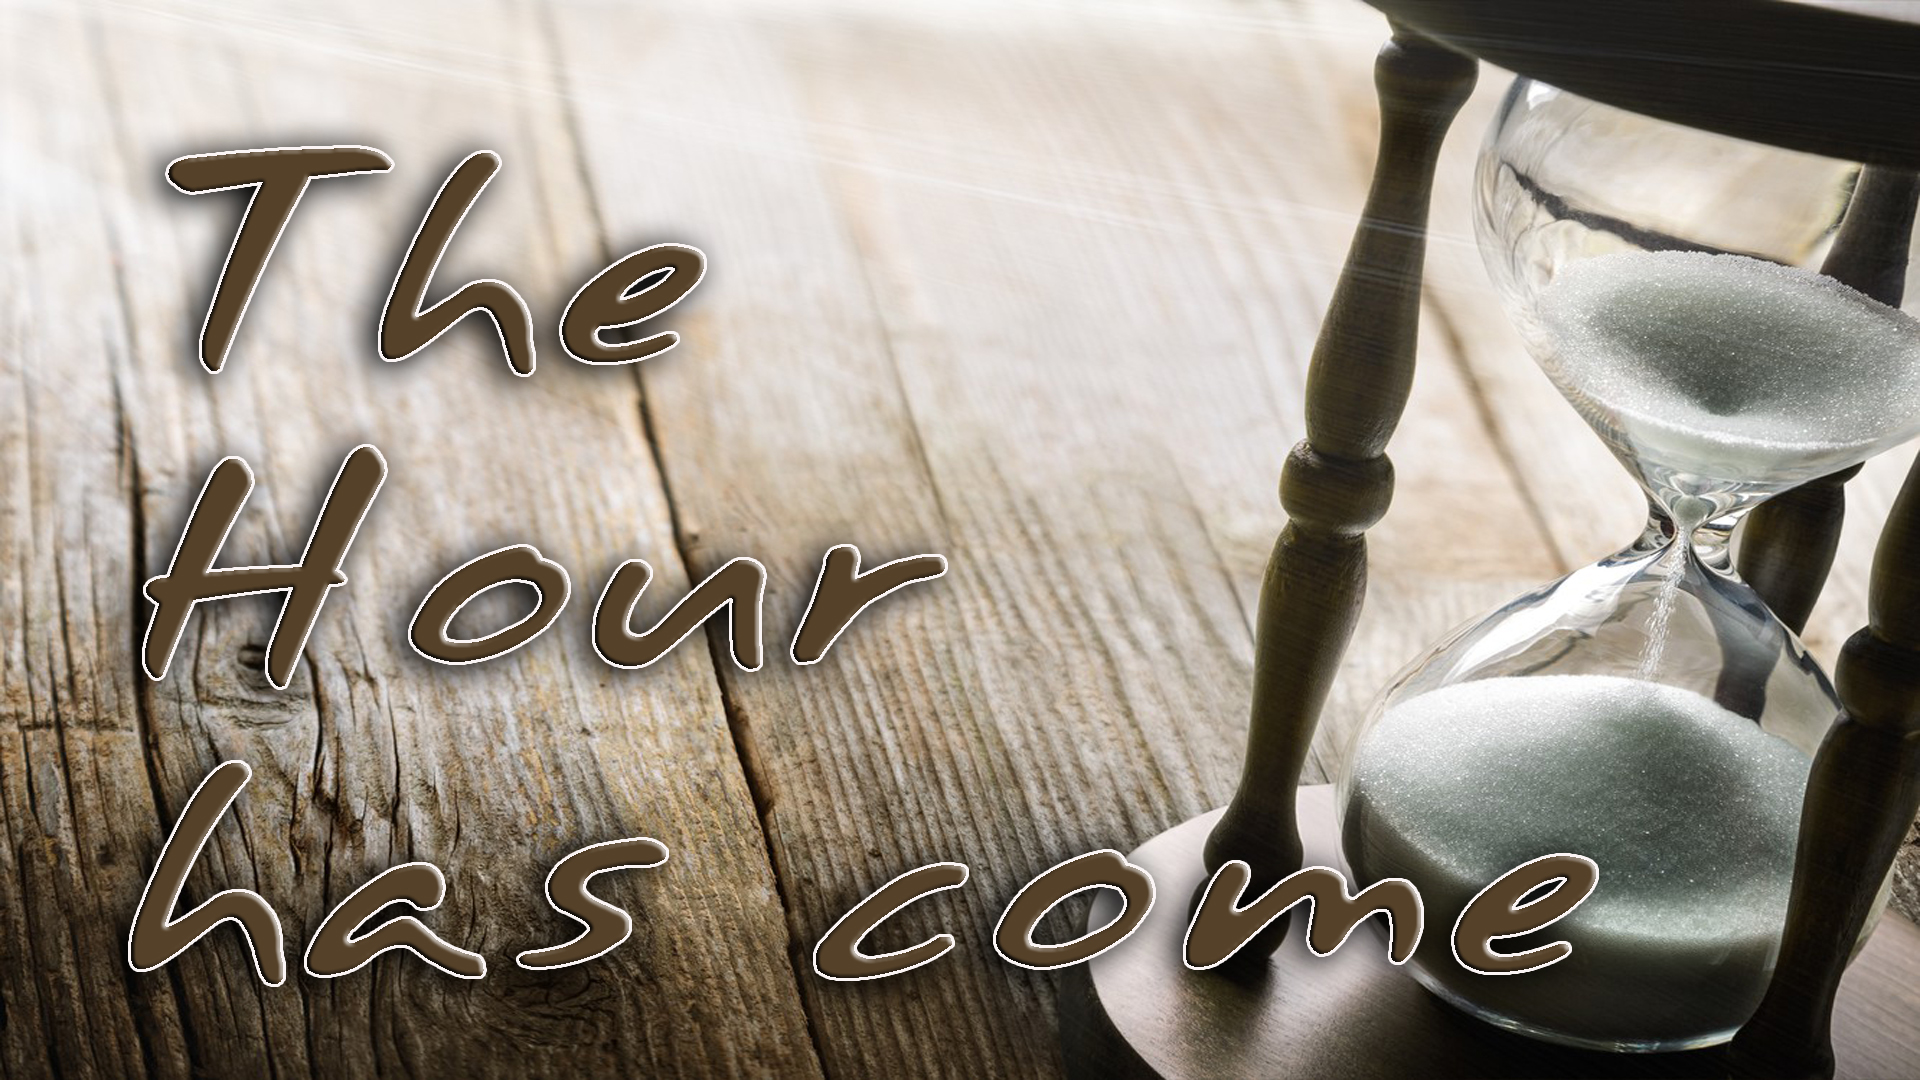 The HOUR has come – 18h00